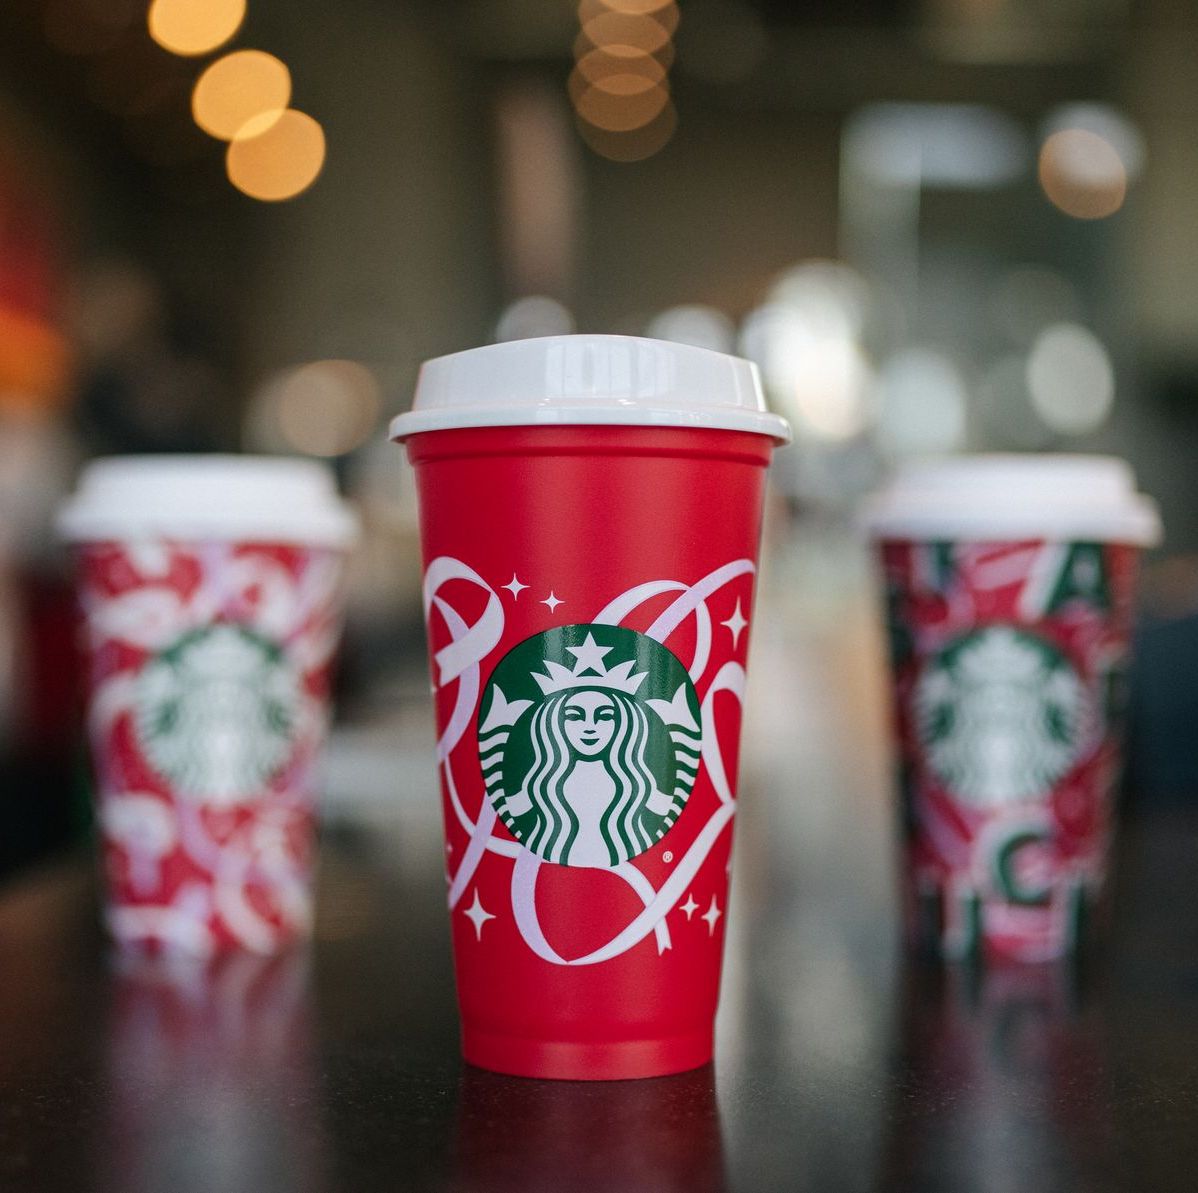 Starbucks Reusable Cups  Adorable Holiday Inspired Cups!